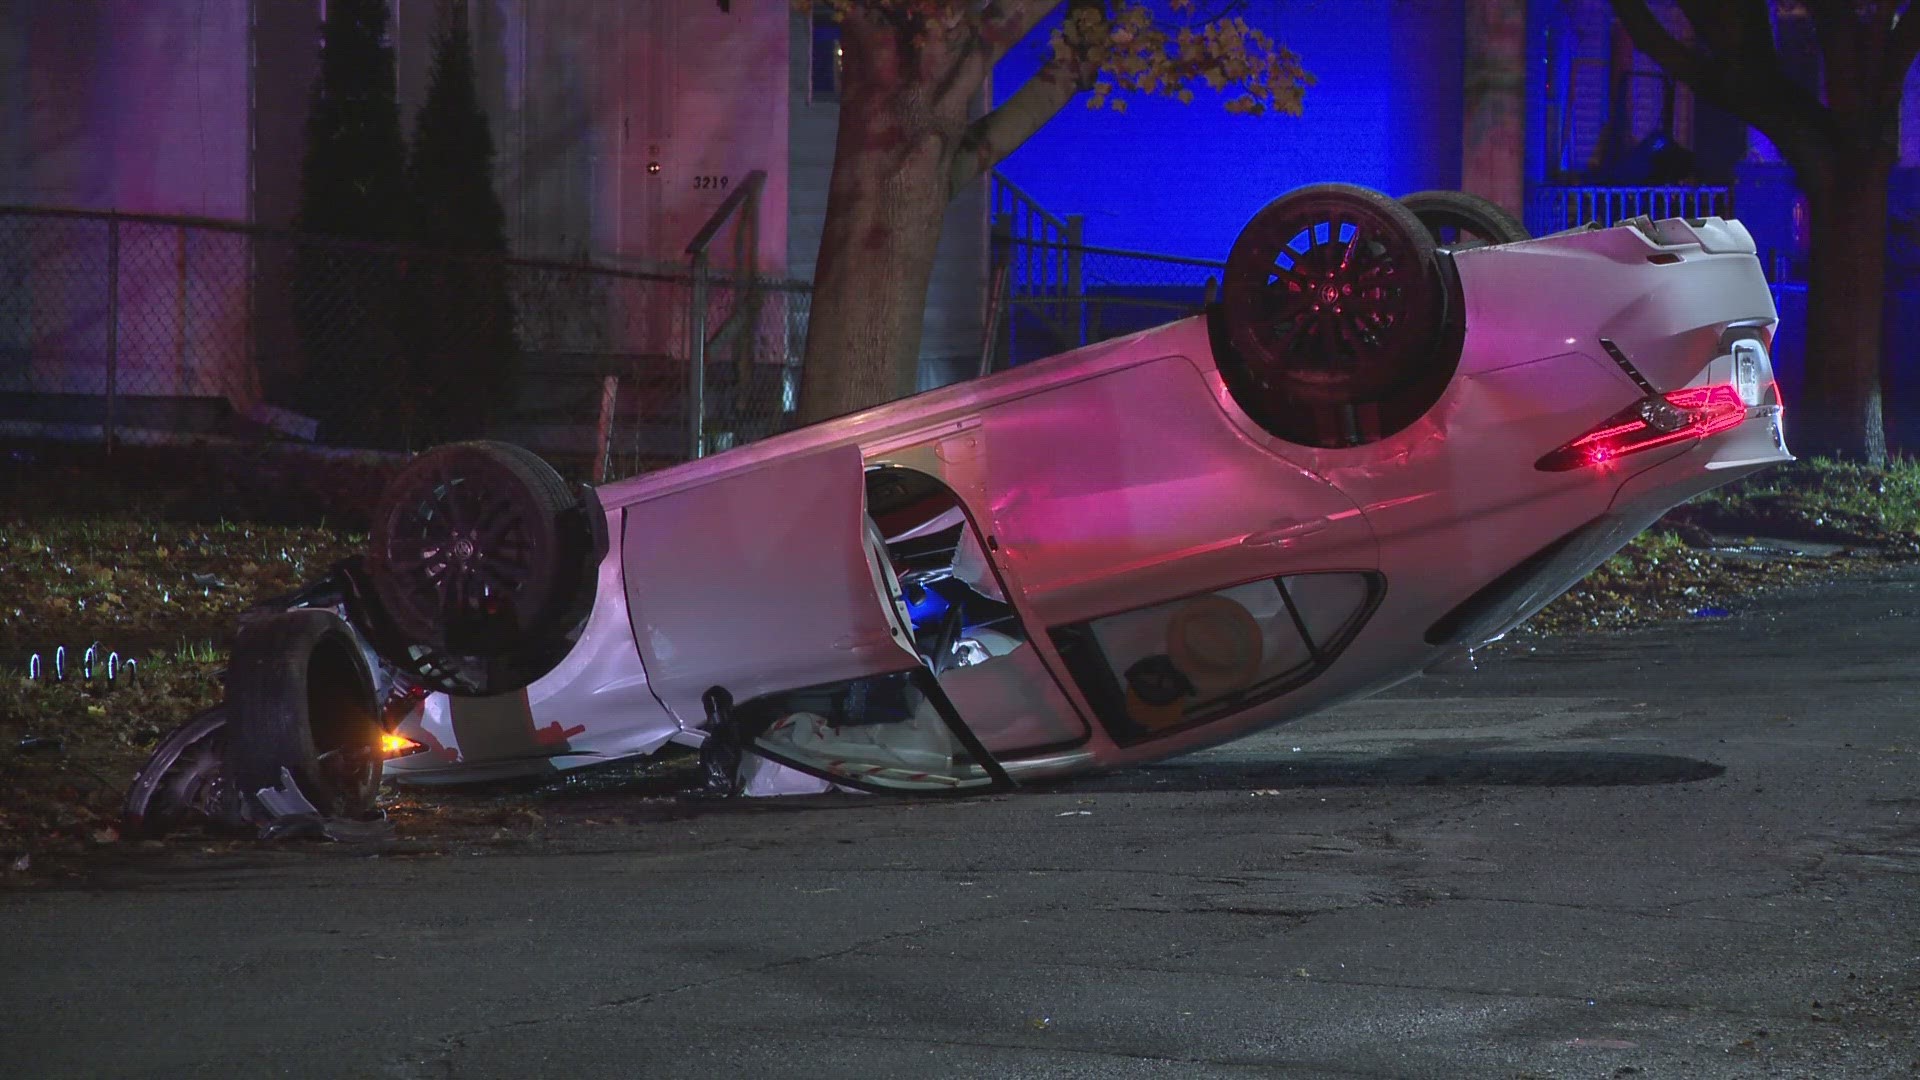 One person was taken to the hospital after an overnight crash in Cleveland. It happened in the 3200 block of West 61st Street as the driver struck a pole.